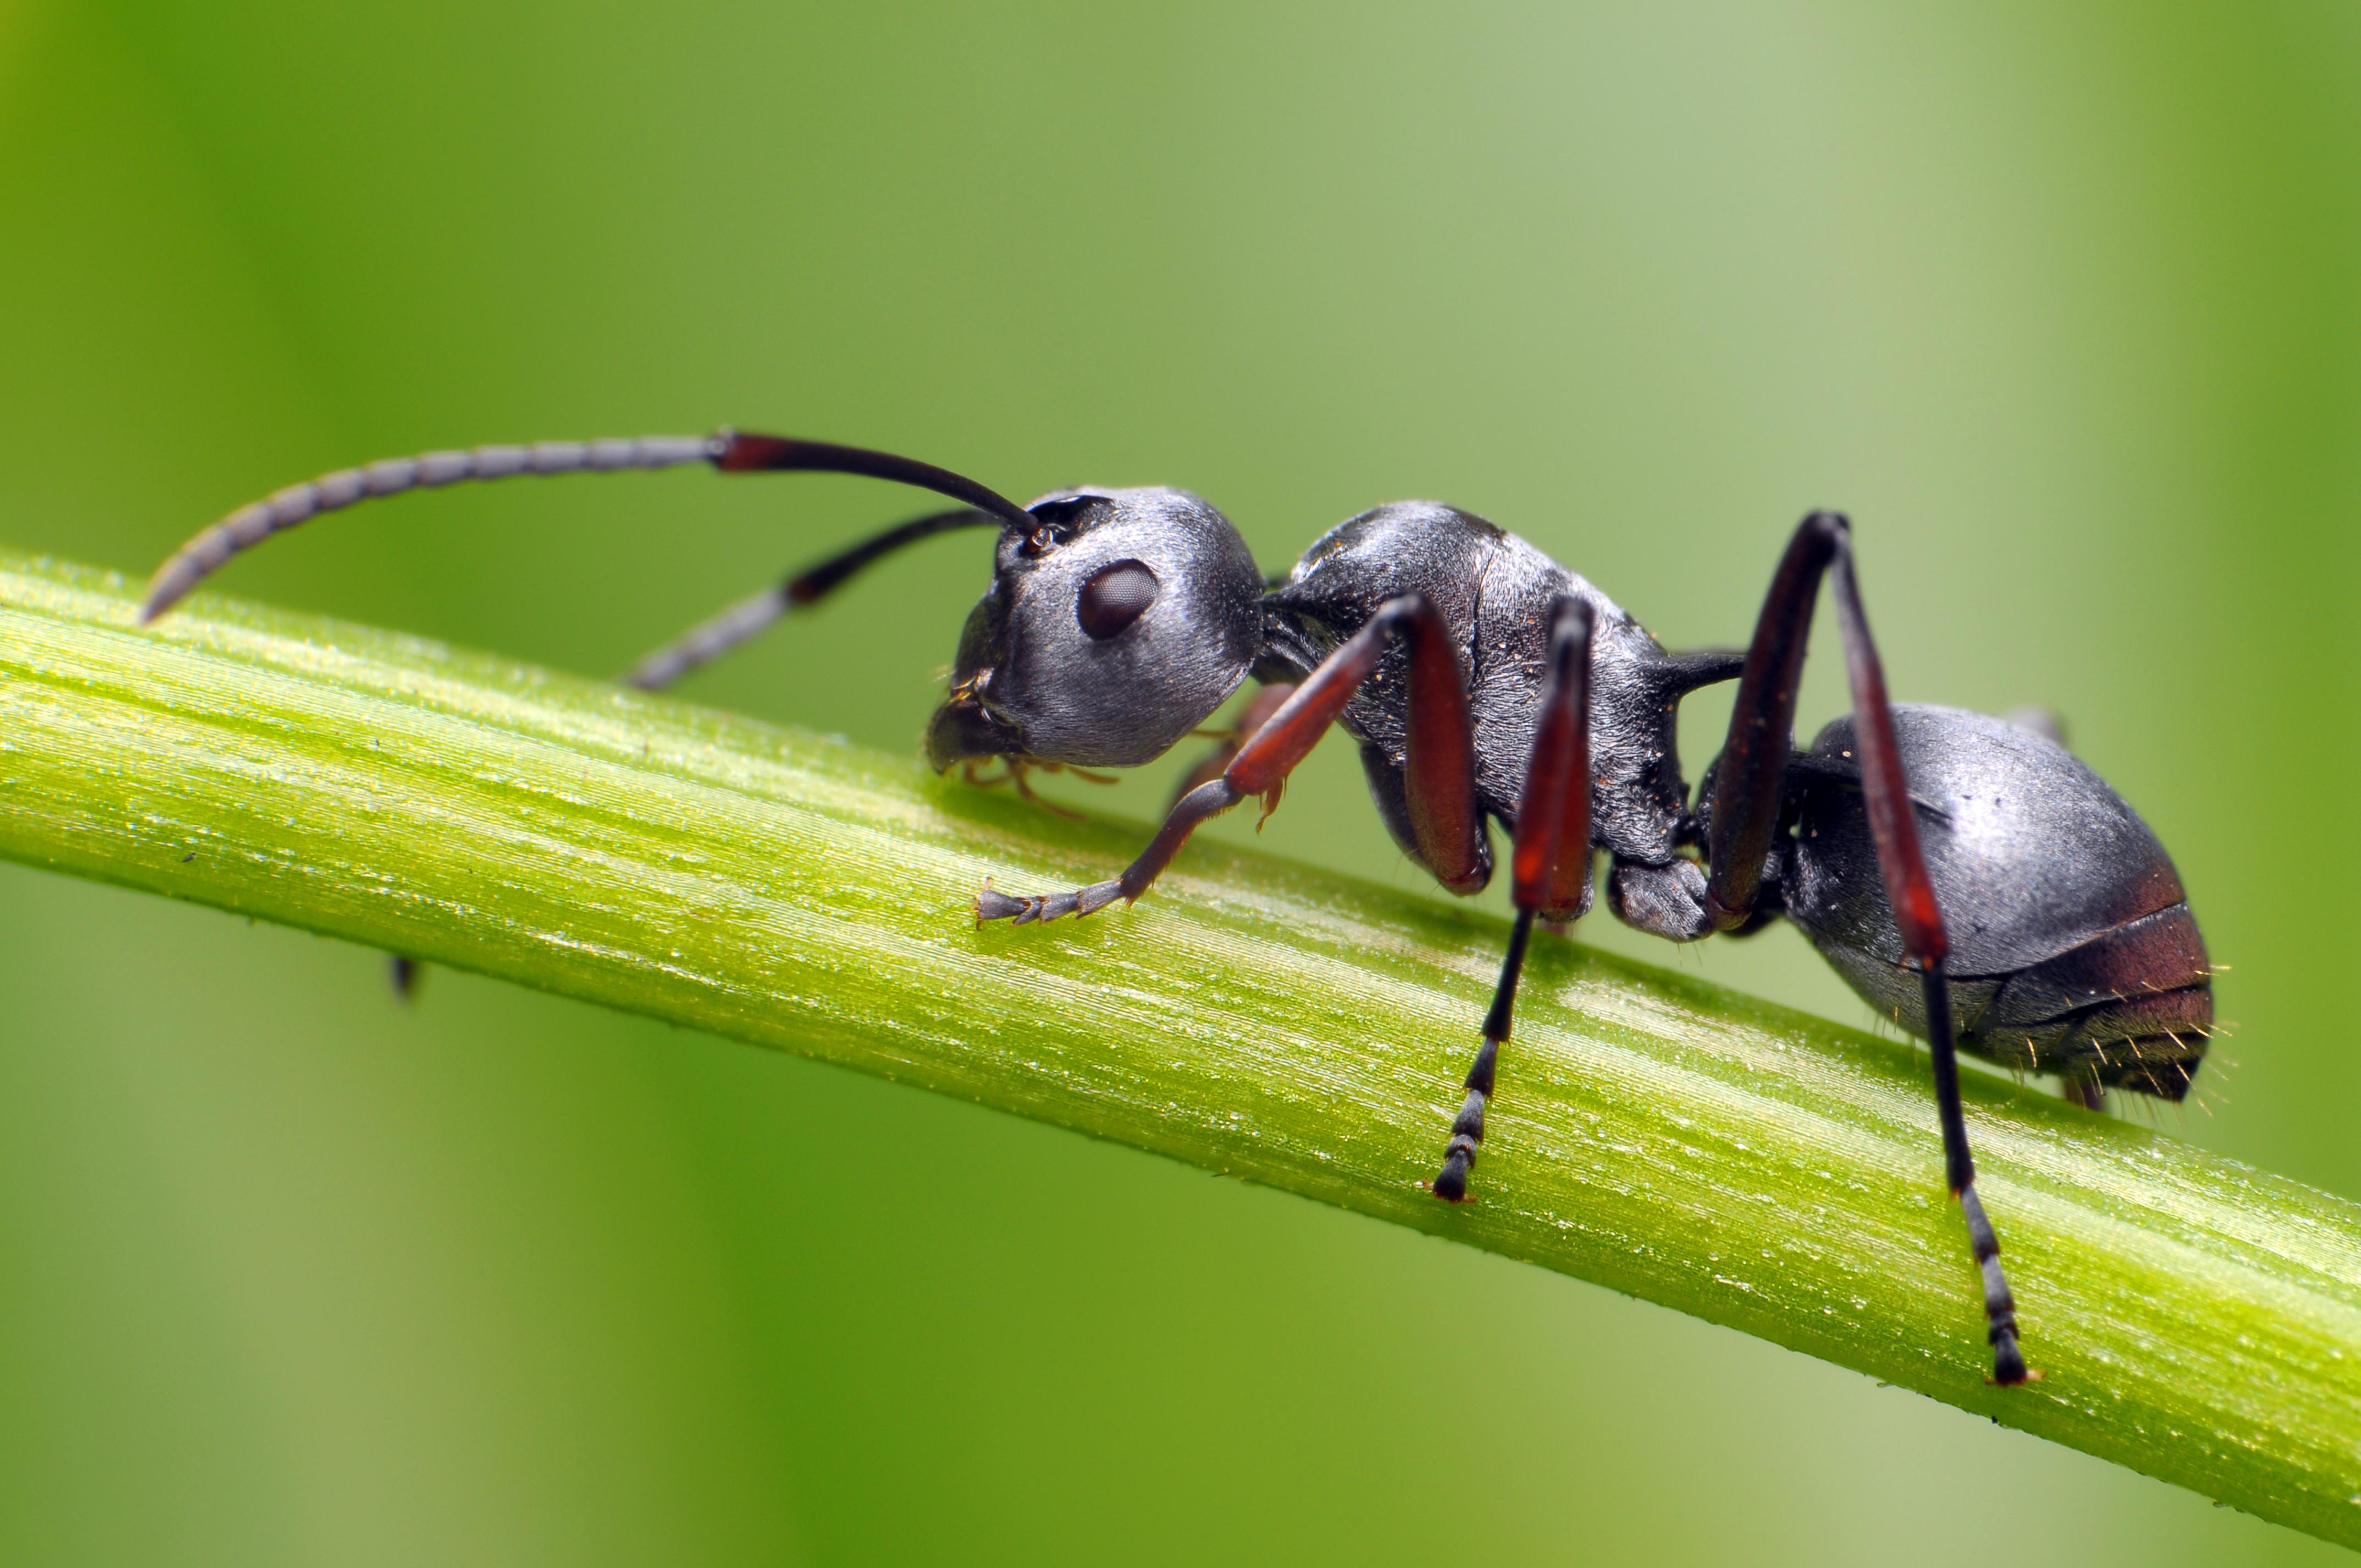 Ants are incredibly smart!